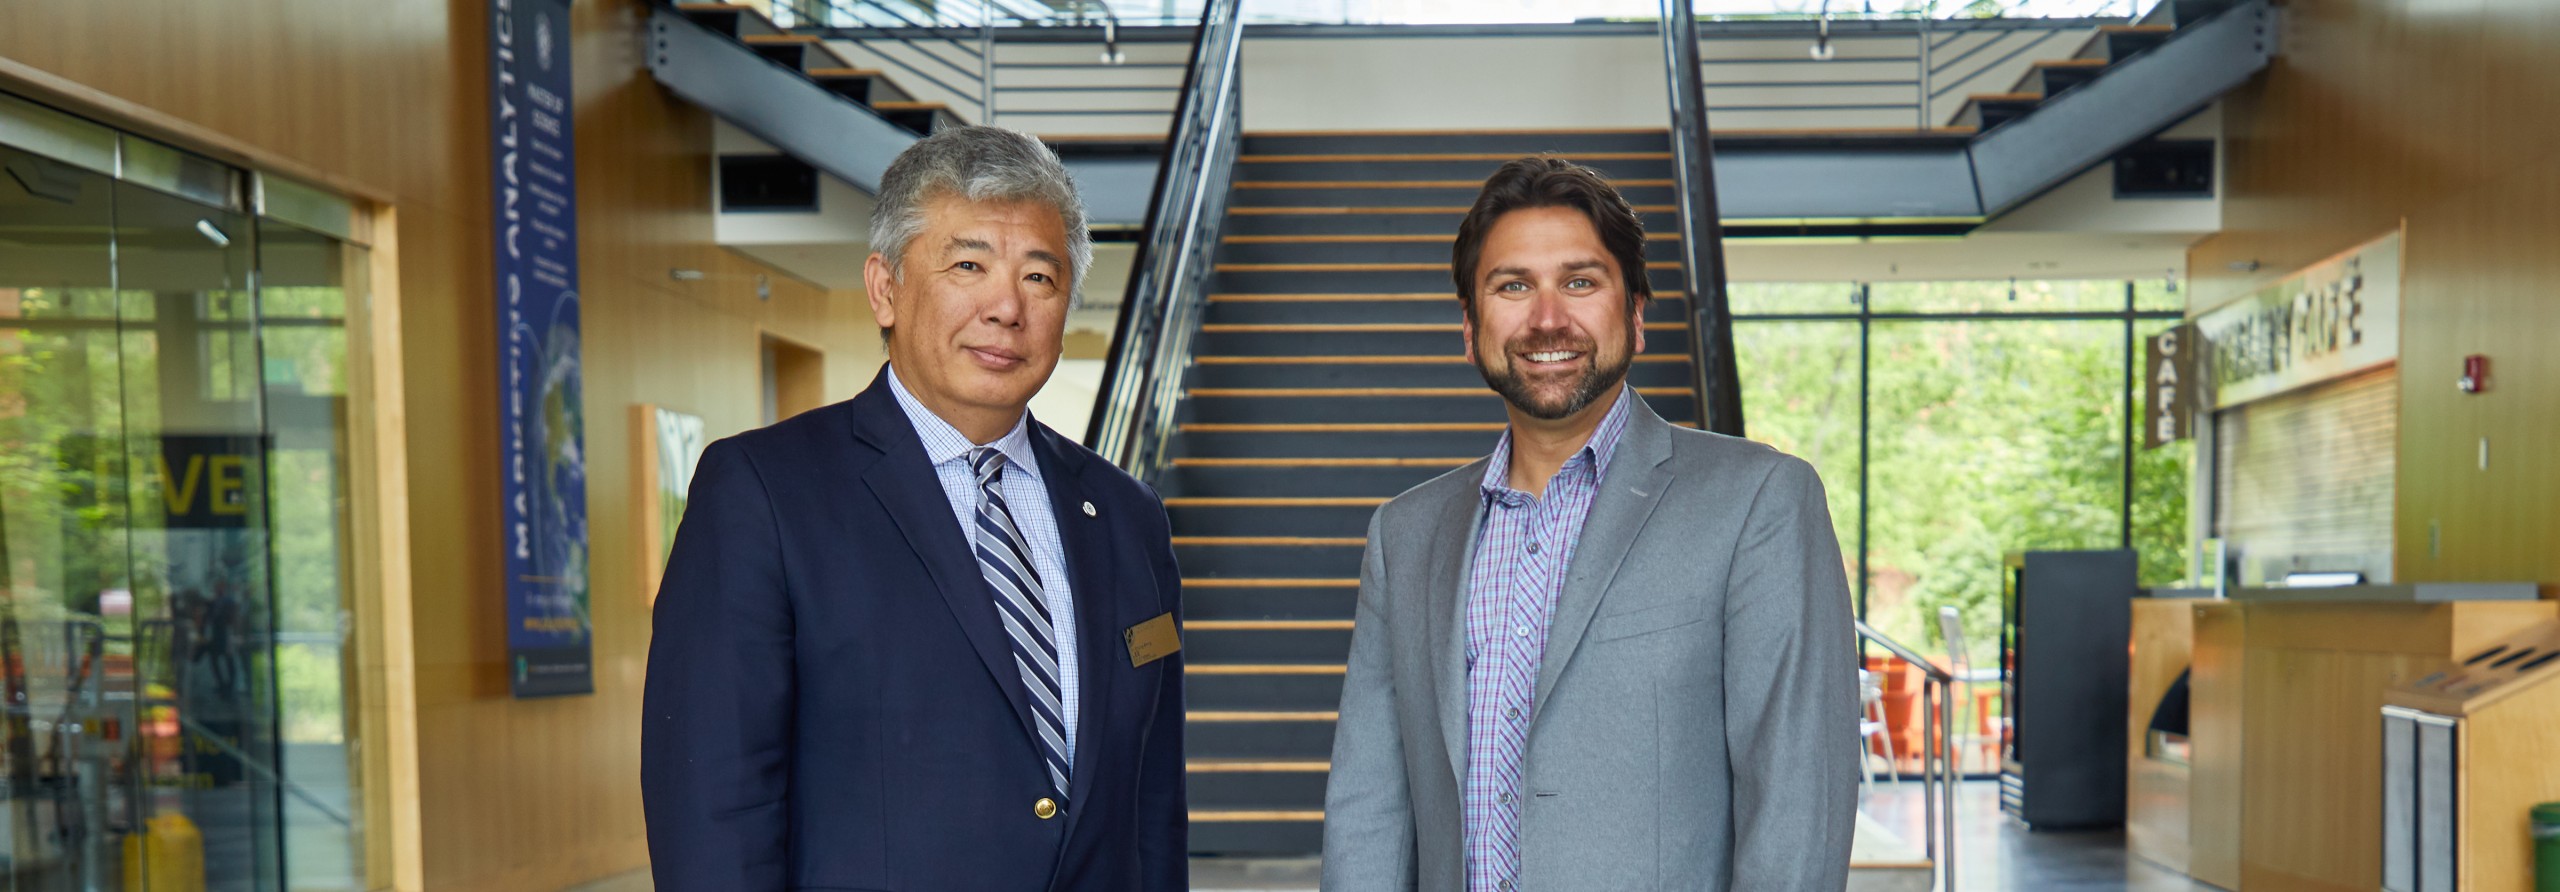 Justin Foster '02, and School of Business Dean Chung-Shing Lee photographed in and around Morken at at PLU.